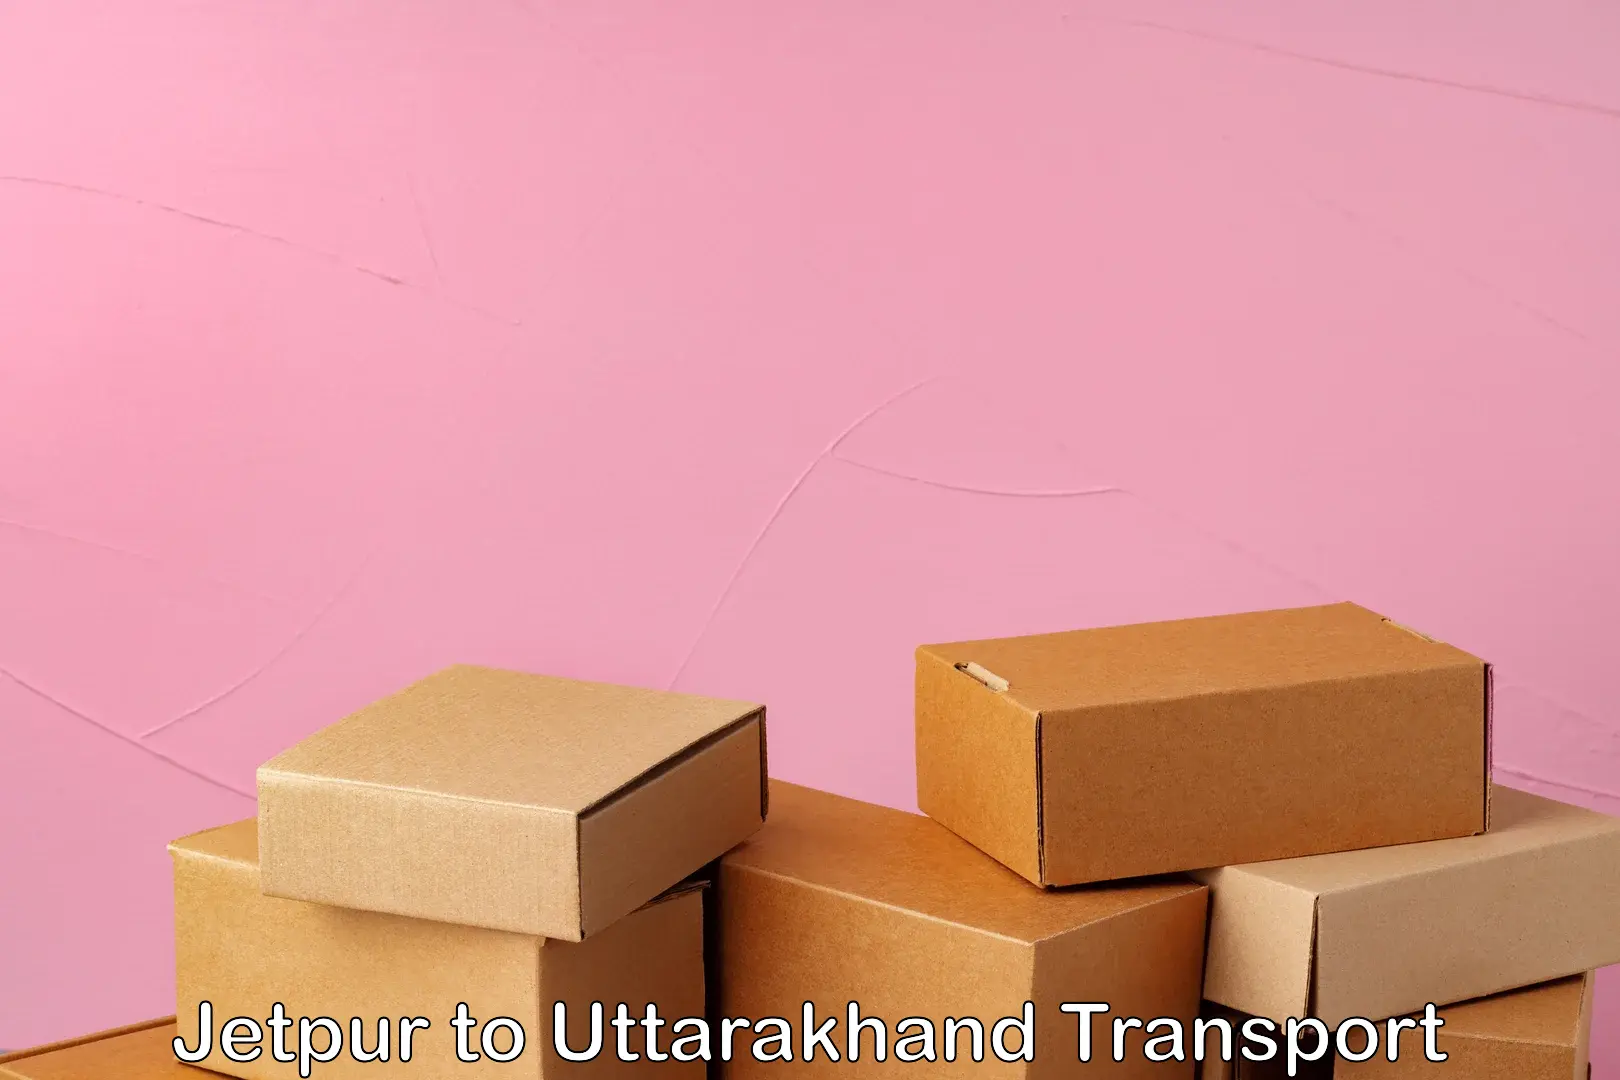 Nationwide transport services Jetpur to Haridwar